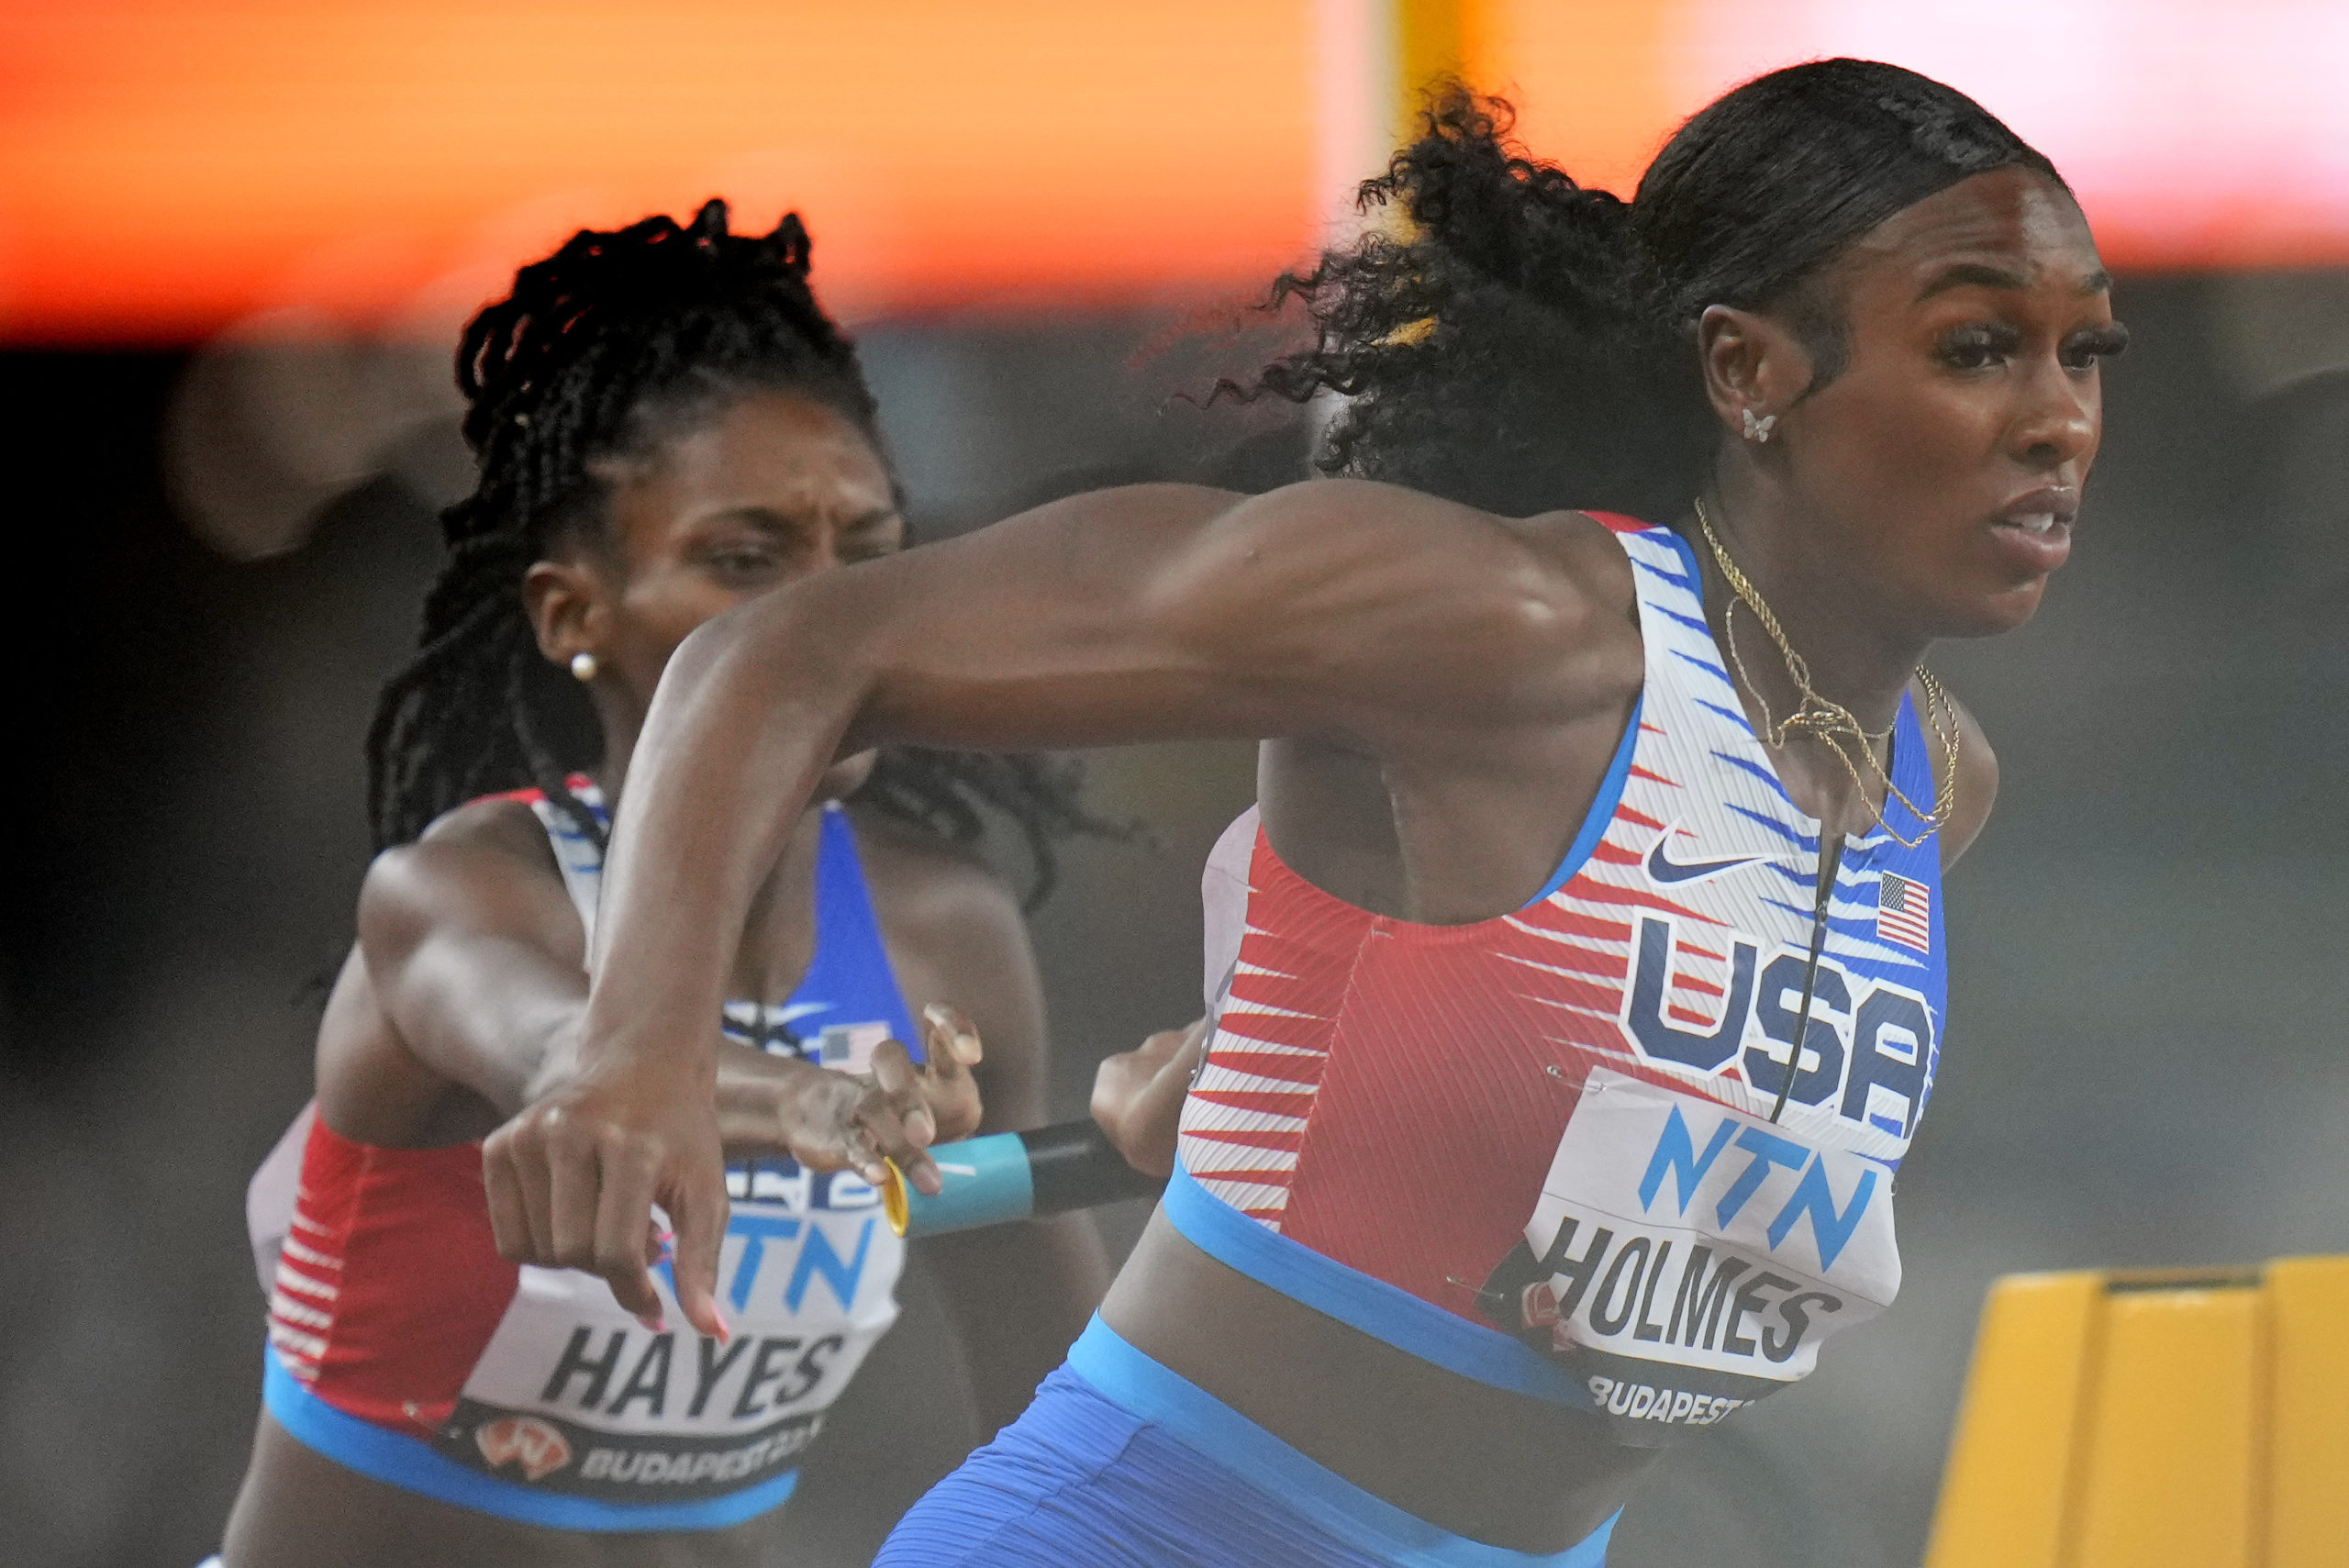 U.S. runners Alexis Holmes and Quanera Hayes fail to make the final baton exchange in a women's 4x400-meter relay heat Saturday during the World Championships in track and field in Budapest, Hungary. The U.S. 4x400 team was disqualified during the event.